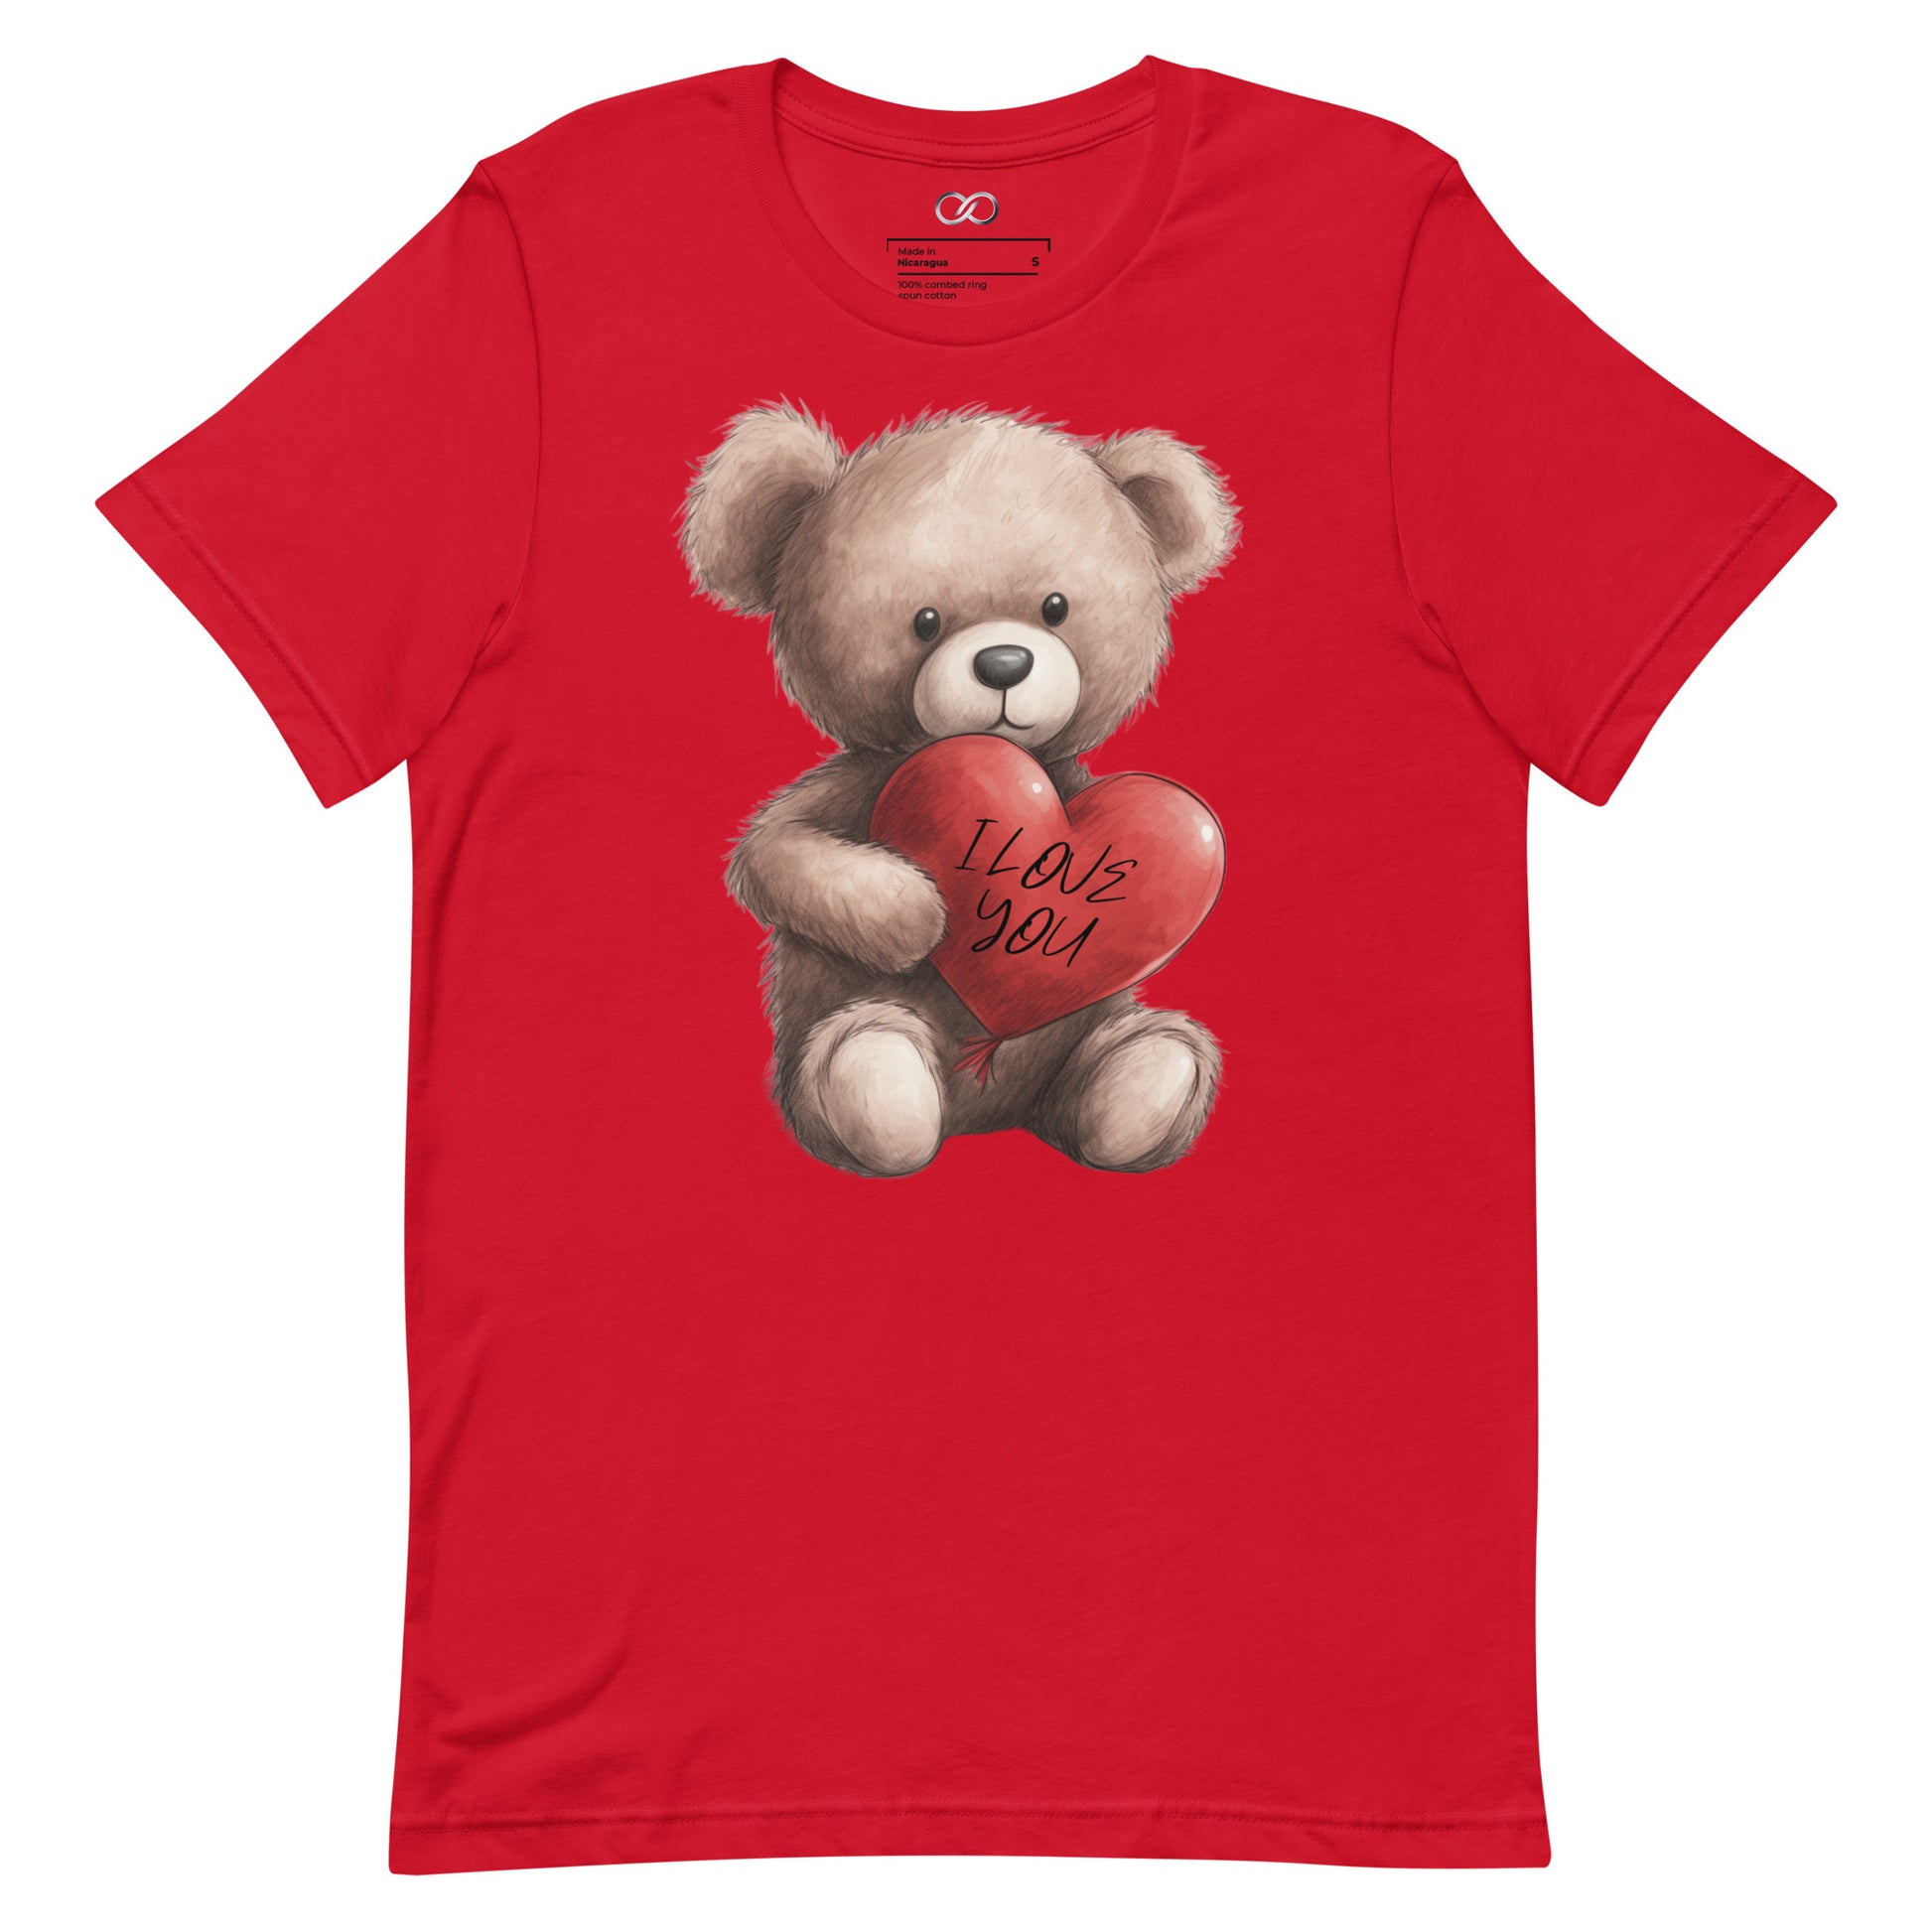 red t-shirt displaying a charming teddy bear clutching a red heart with 'I Love You' script, symbolizing affection and love.